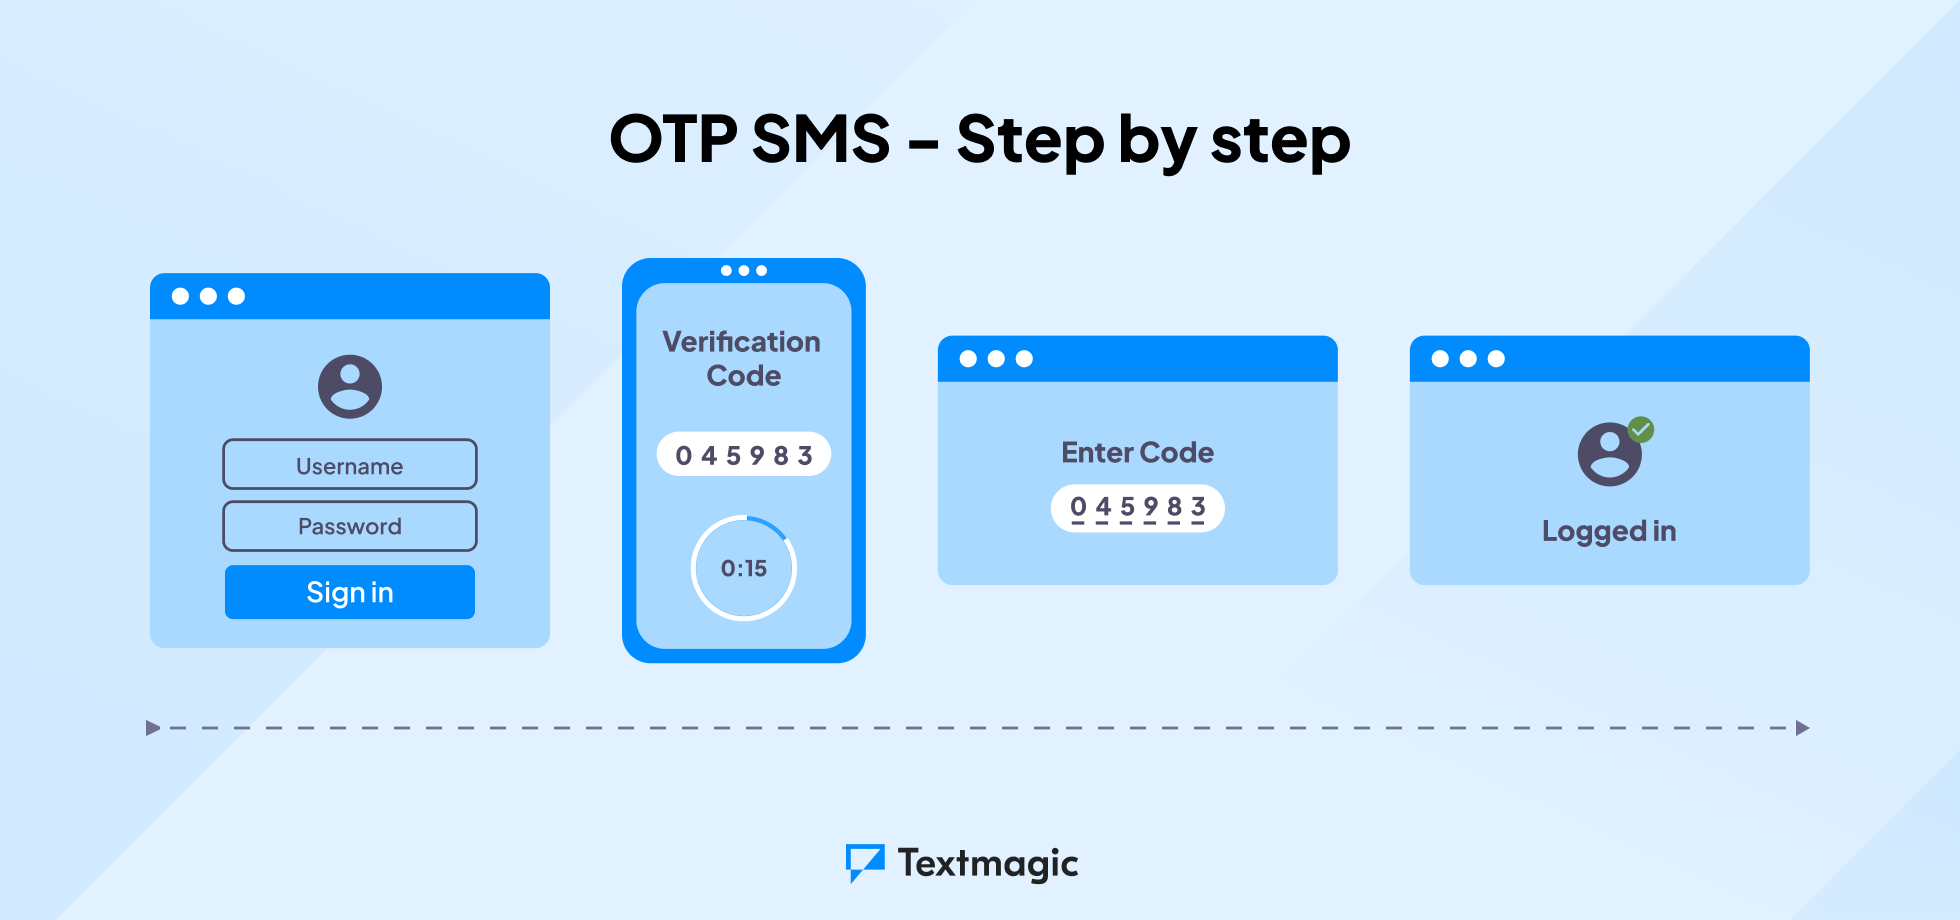 Step by step guide to OTP SMS